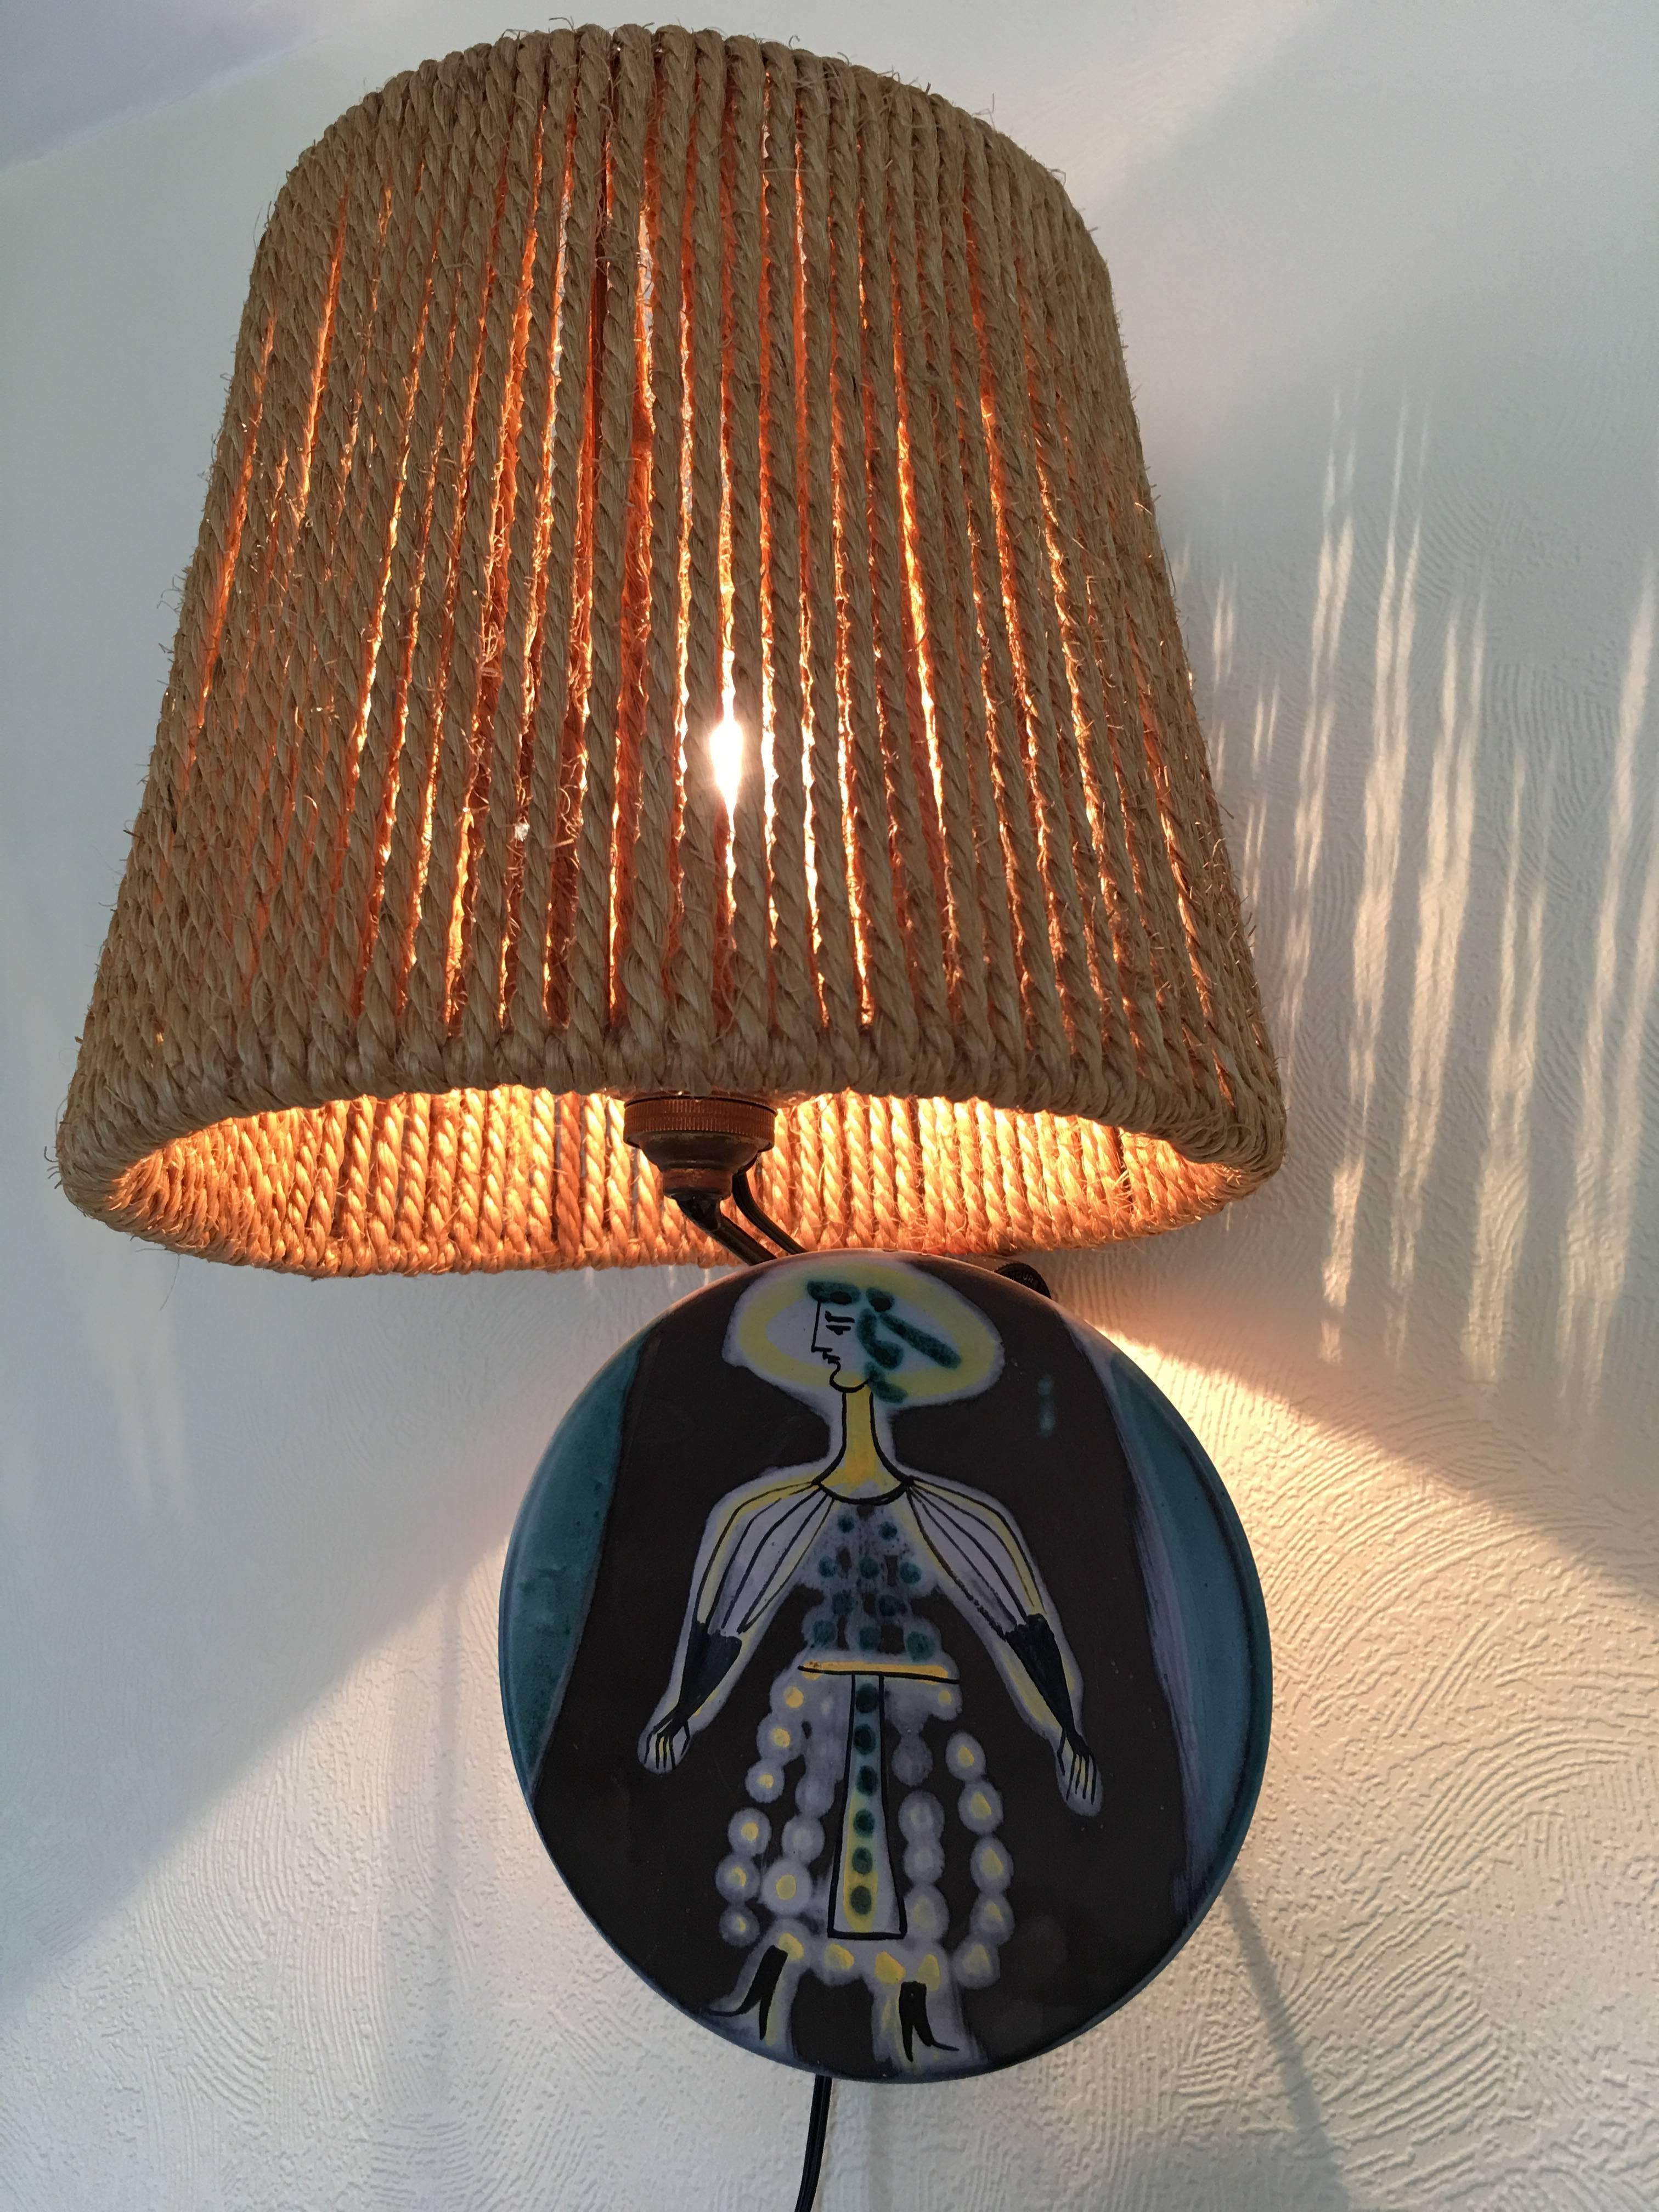 Mid-20th Century Capron Signed Ceramic Plate Sconce, Audoux-Minet Rope Shade, Vallauris France